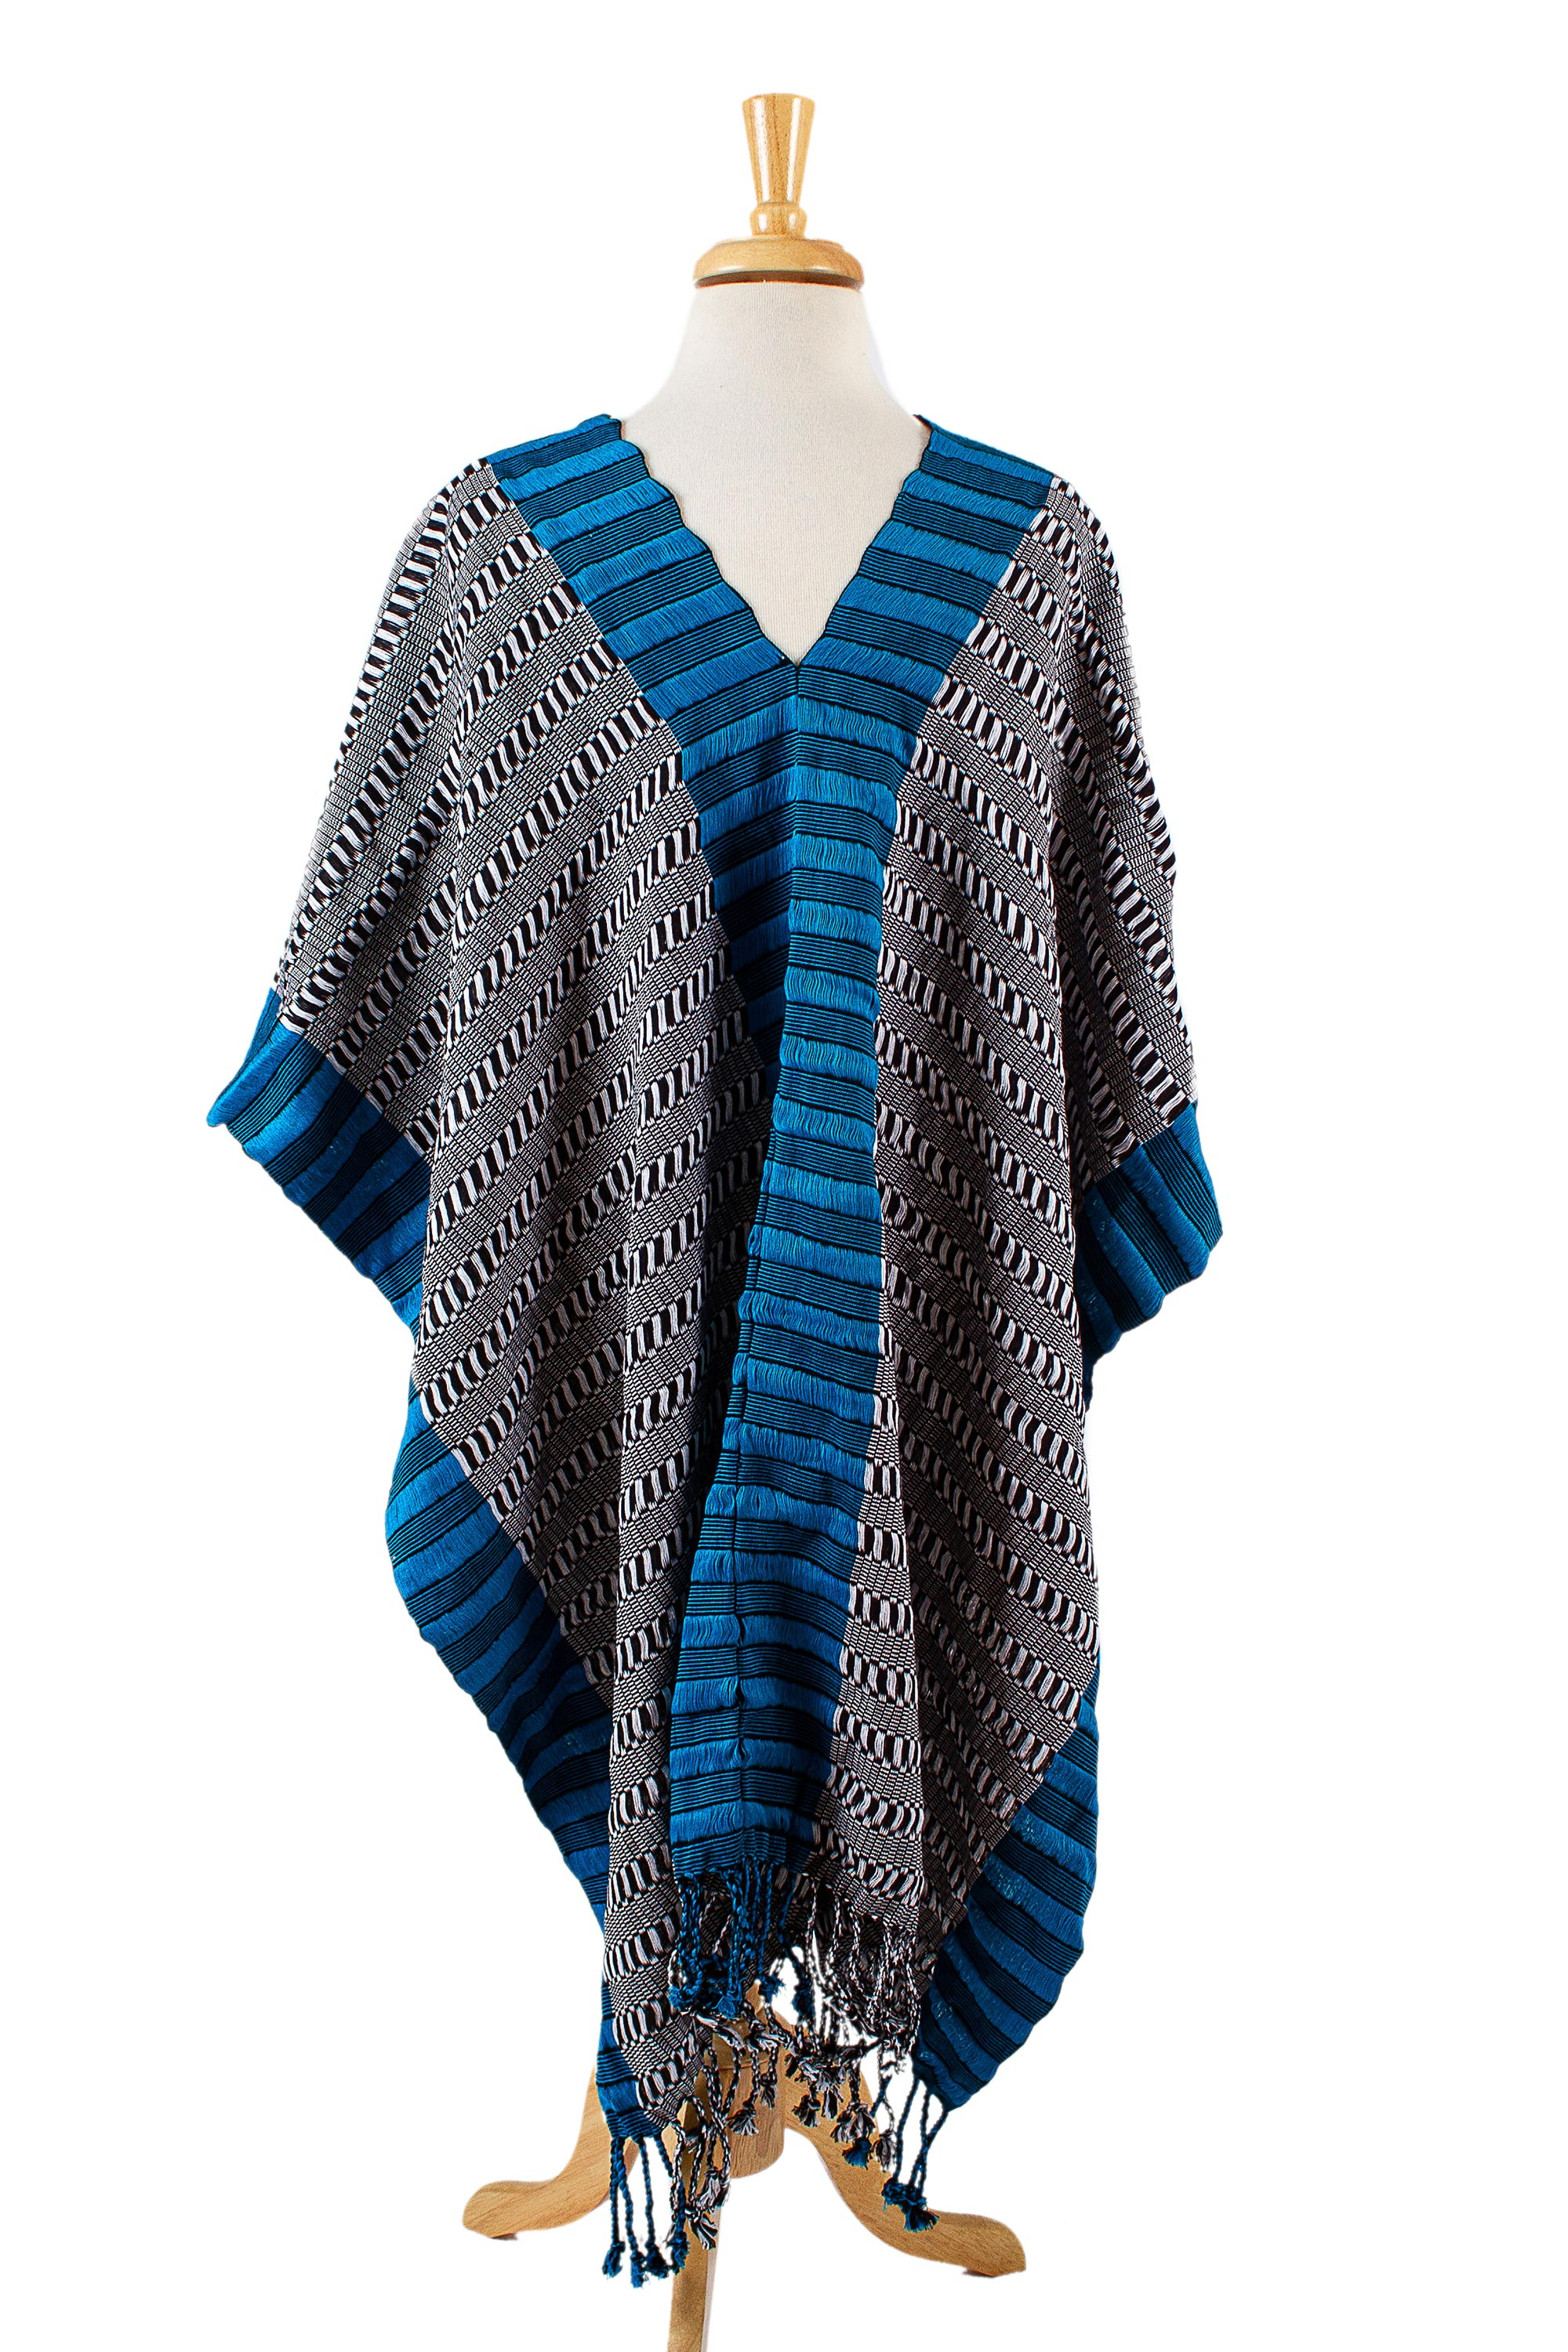 UNICEF Market | Black and White Cotton Poncho with Colorful Trim ...